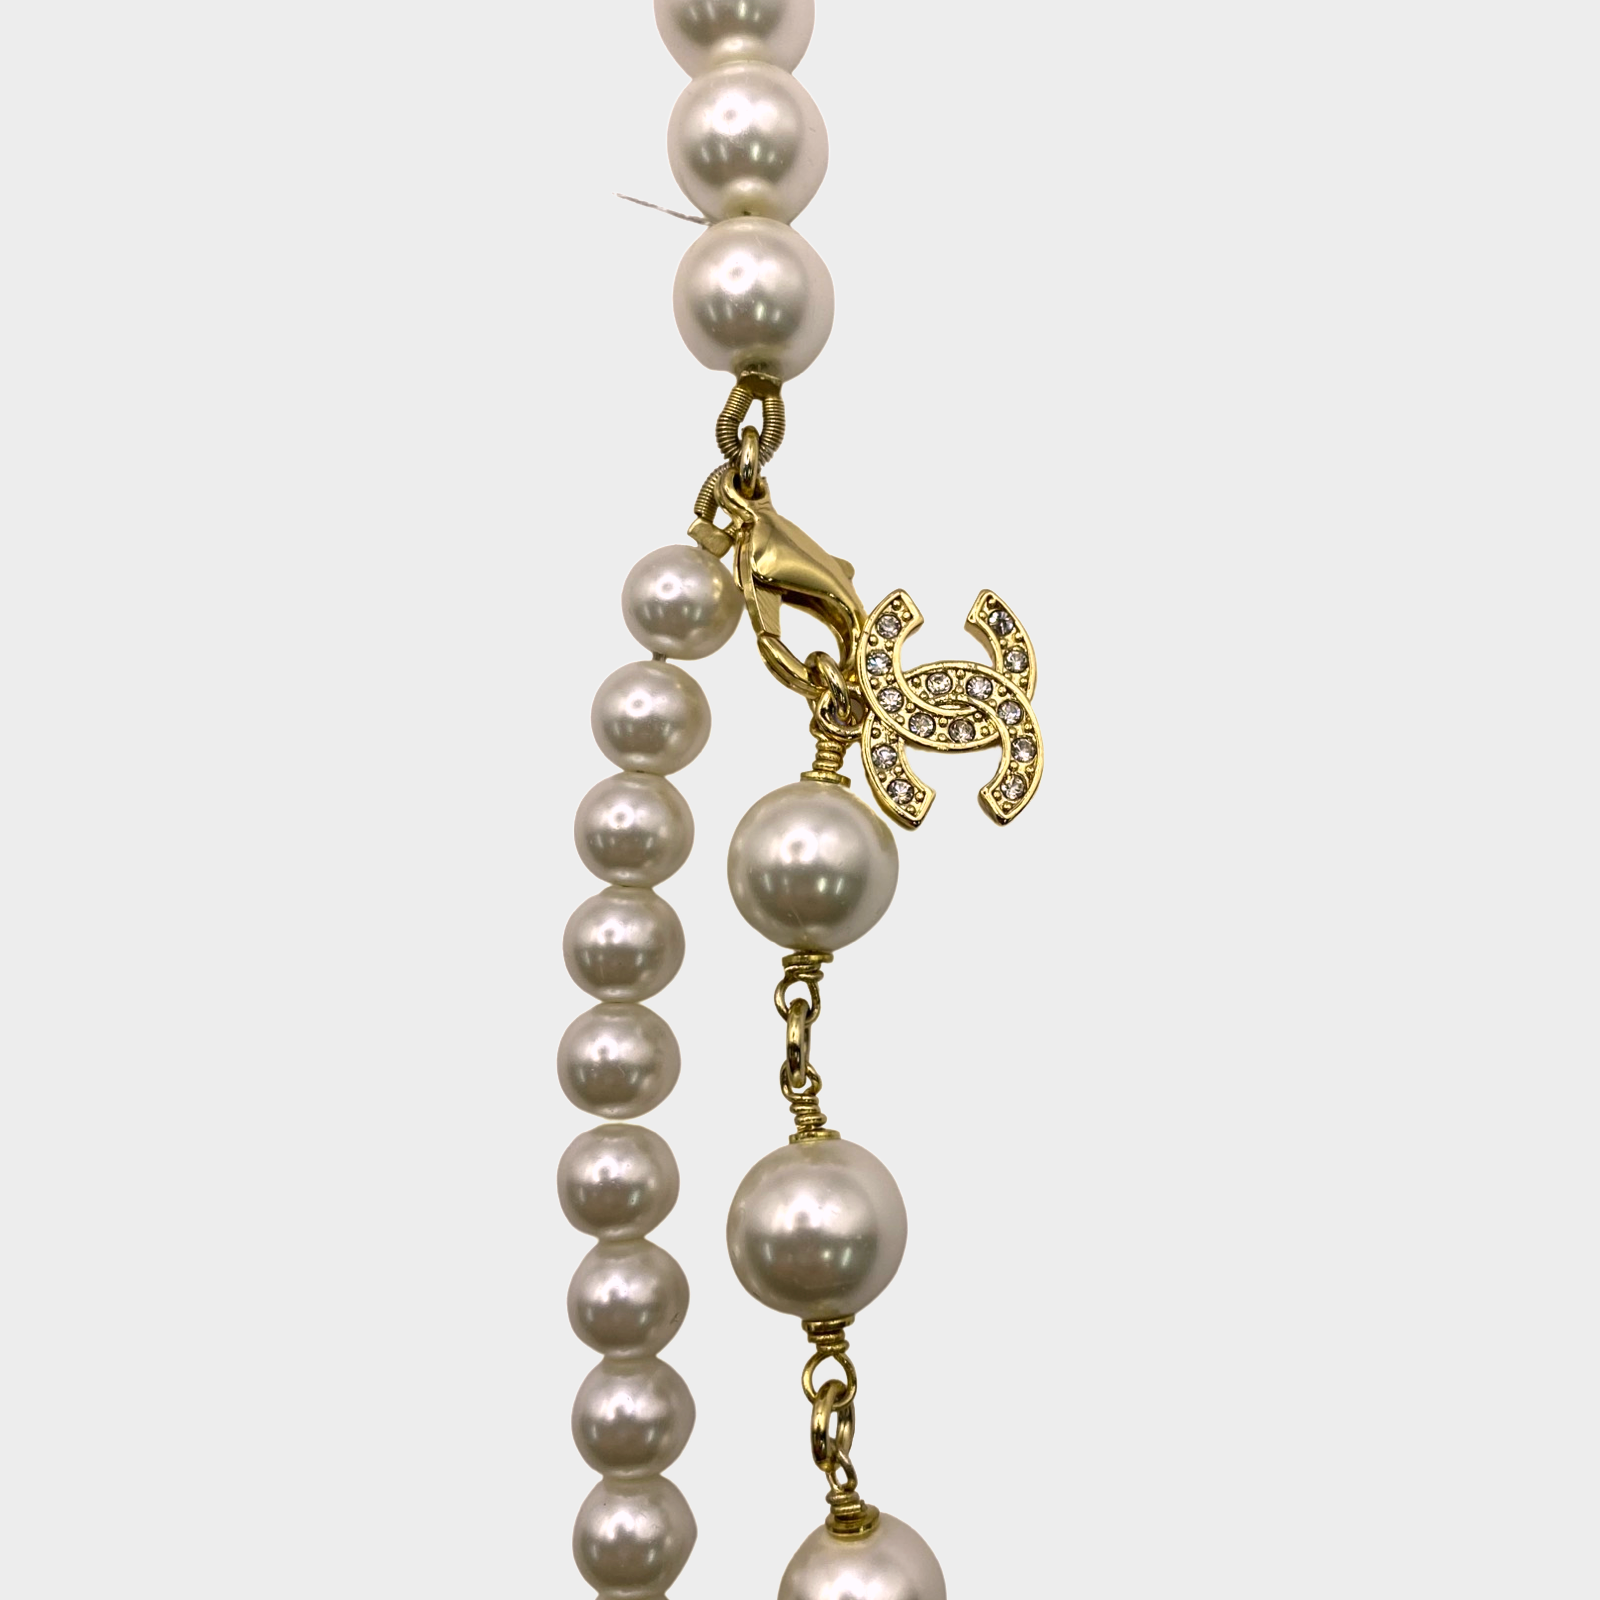 Buy Chanel Pearl Necklace Online In India - Etsy India